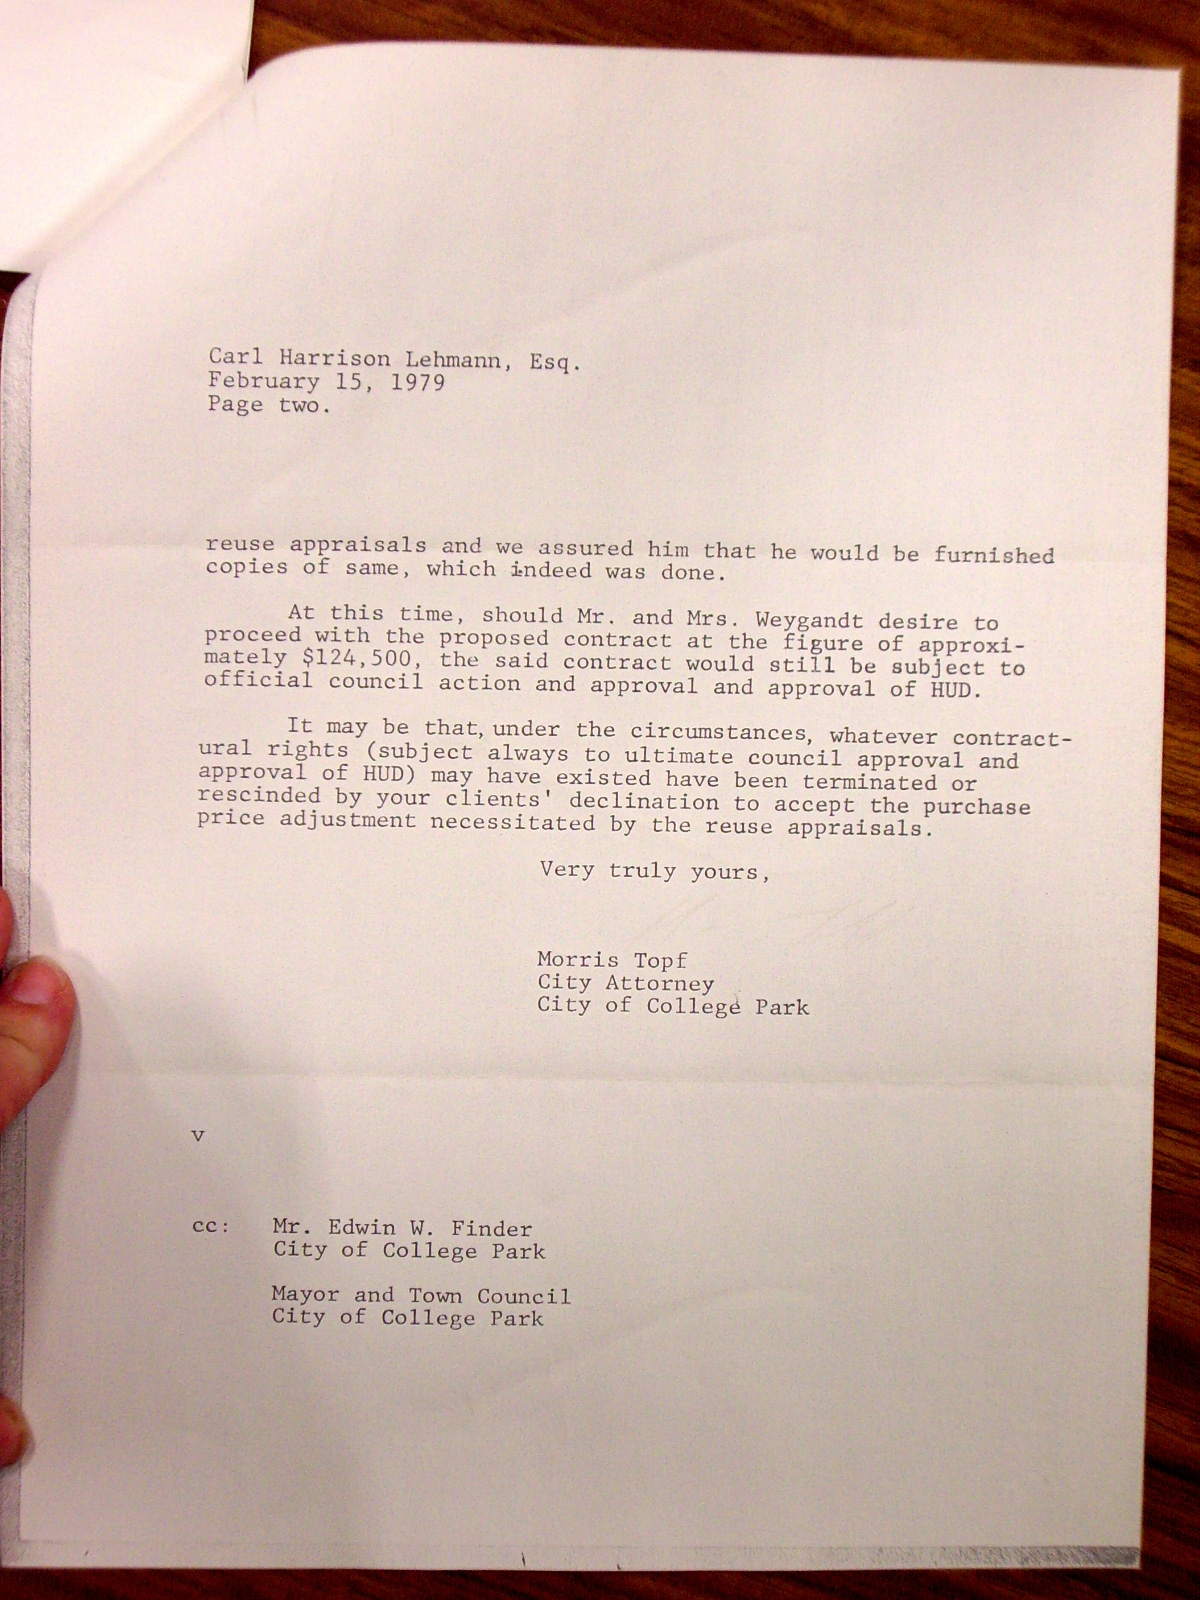 Letter from Morris Topf (duplicate of item-01089 and item-00971)